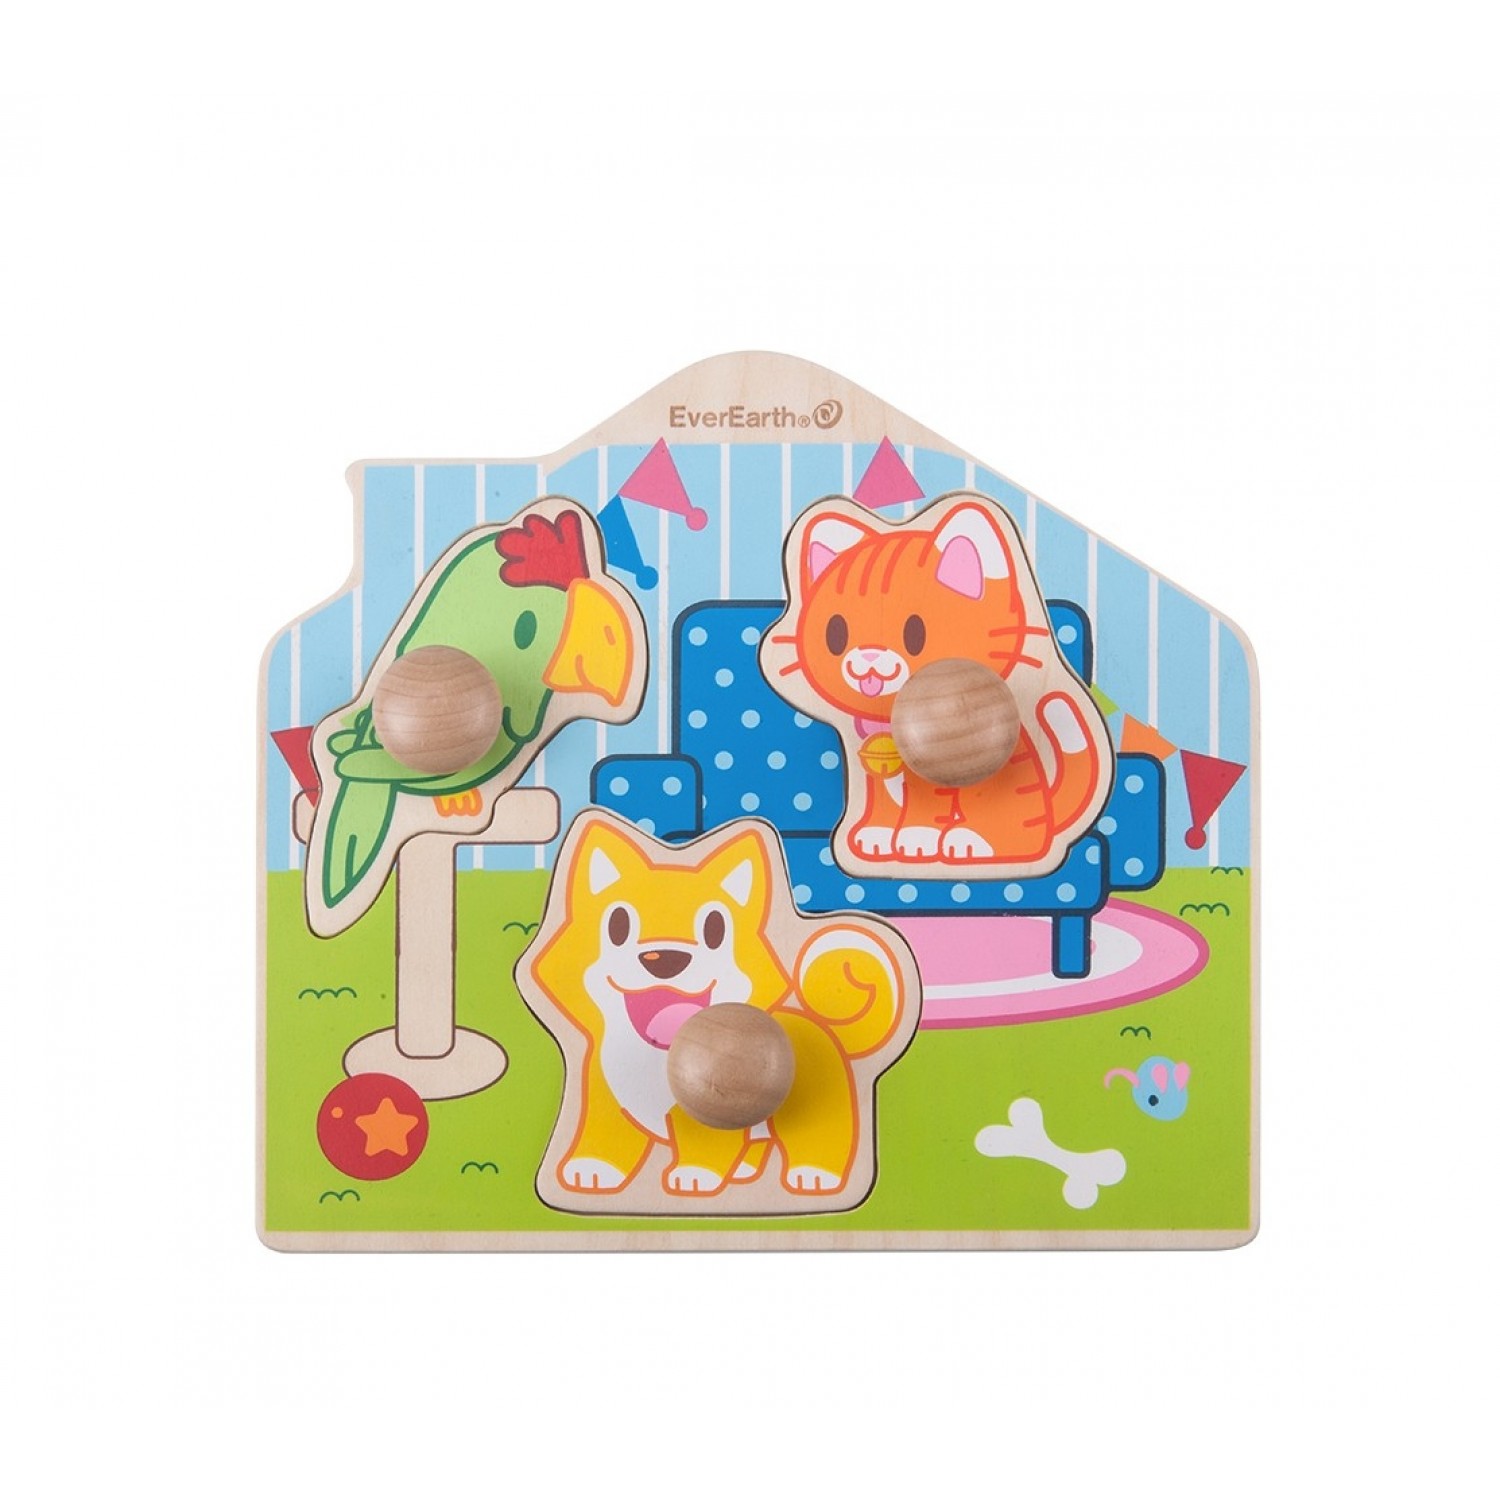 EverEarth Wooden Puzzle “Peg Pet” made of FSC® Wood